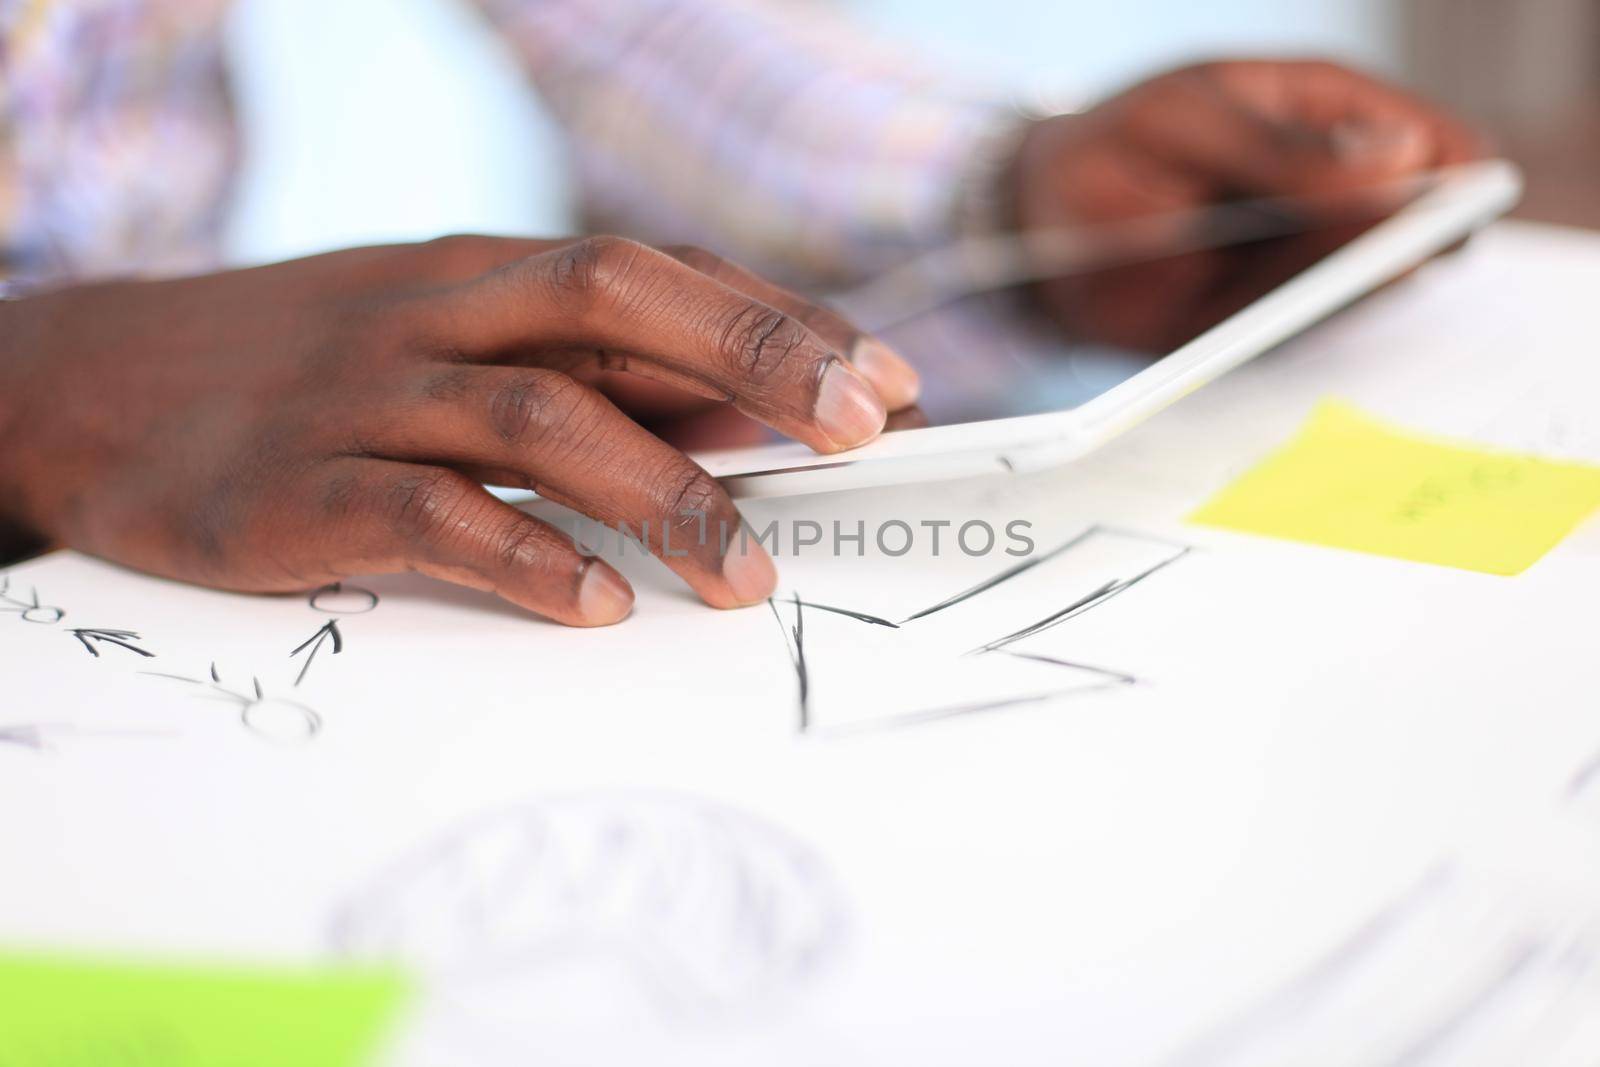 Close-up image of an office worker using a touchpad to analyze statistical data